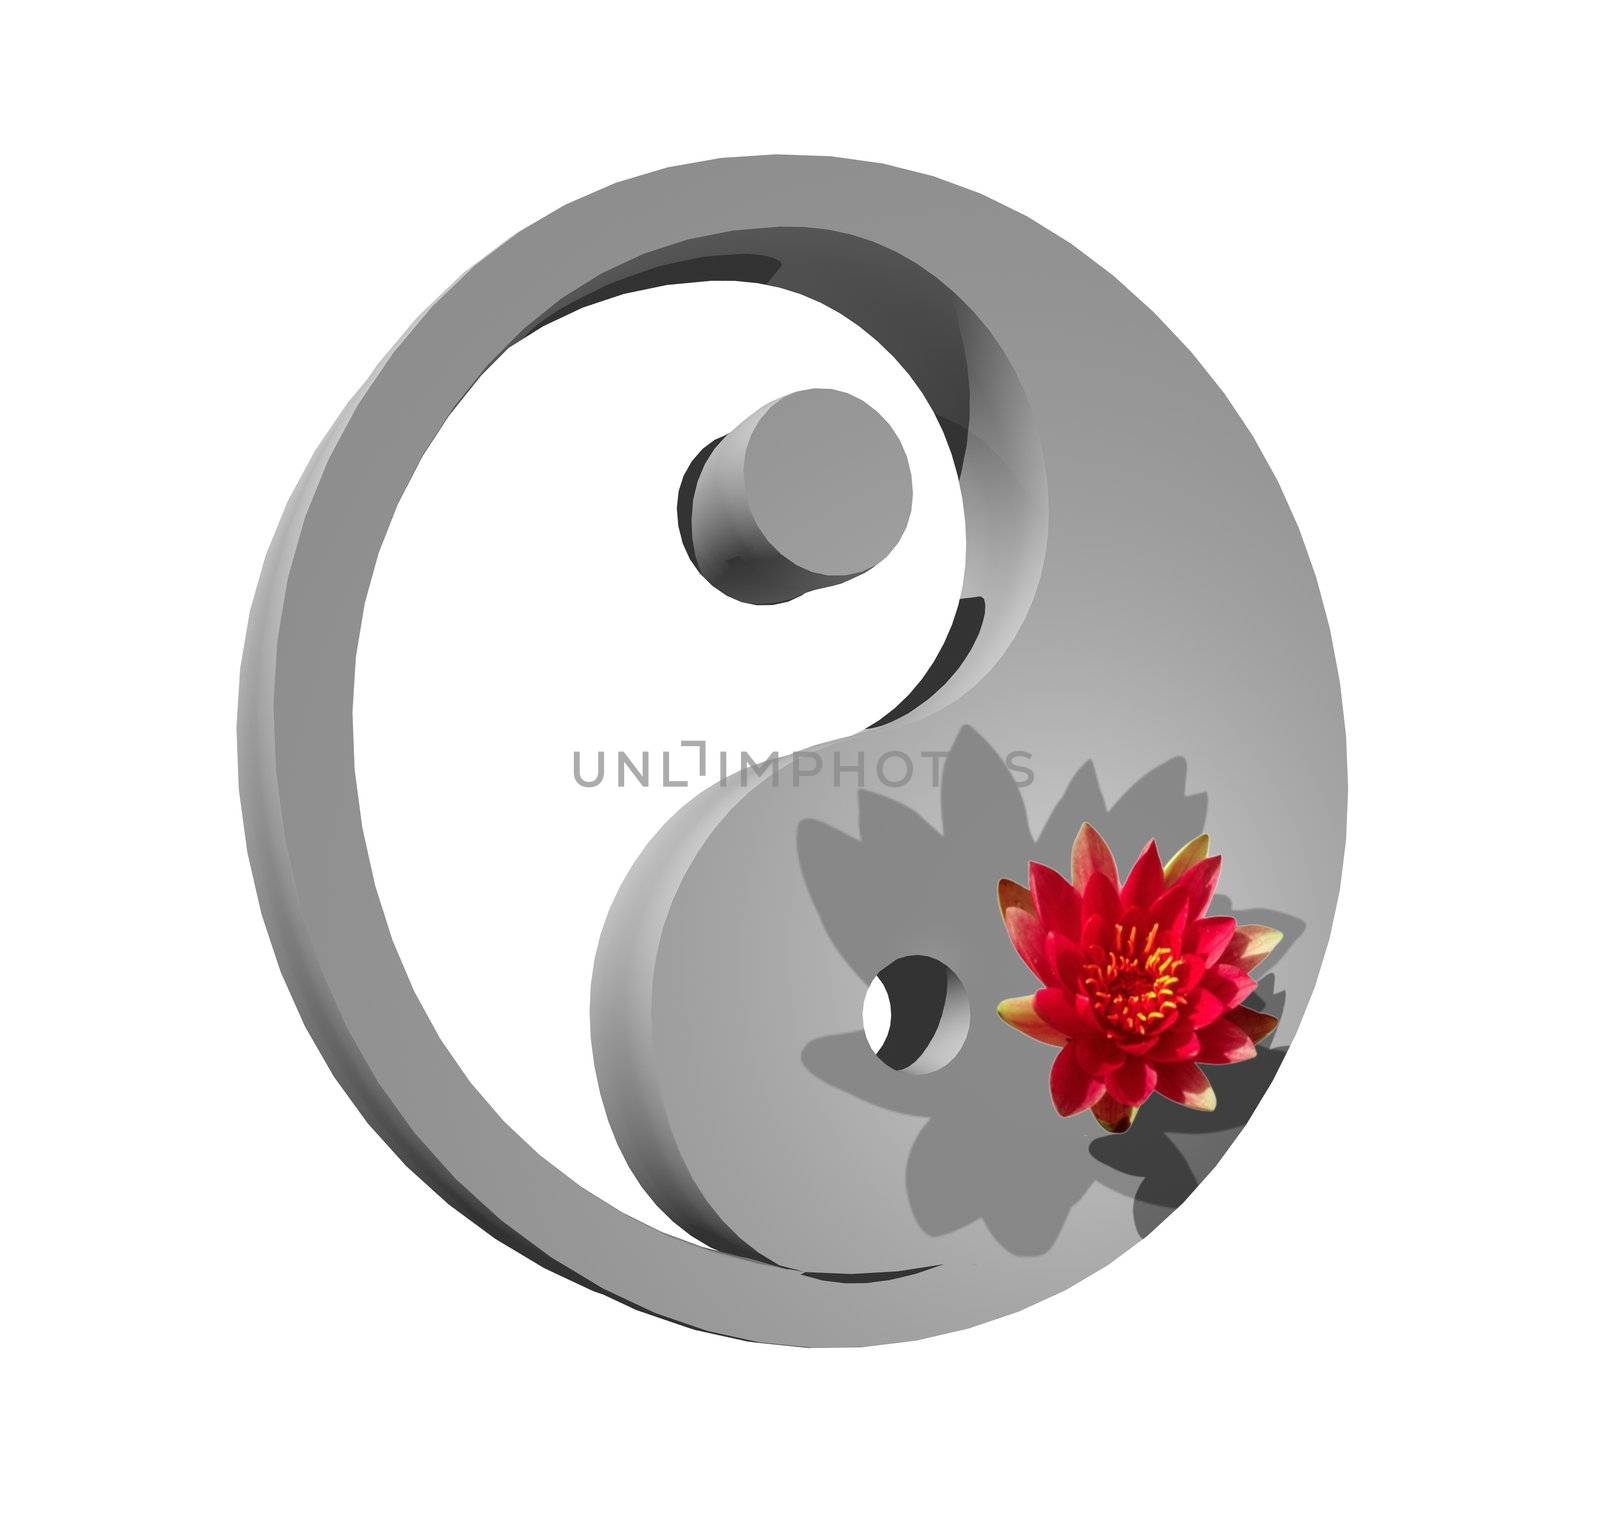 Grey yin and yang symbol with a lily flower on it in white background